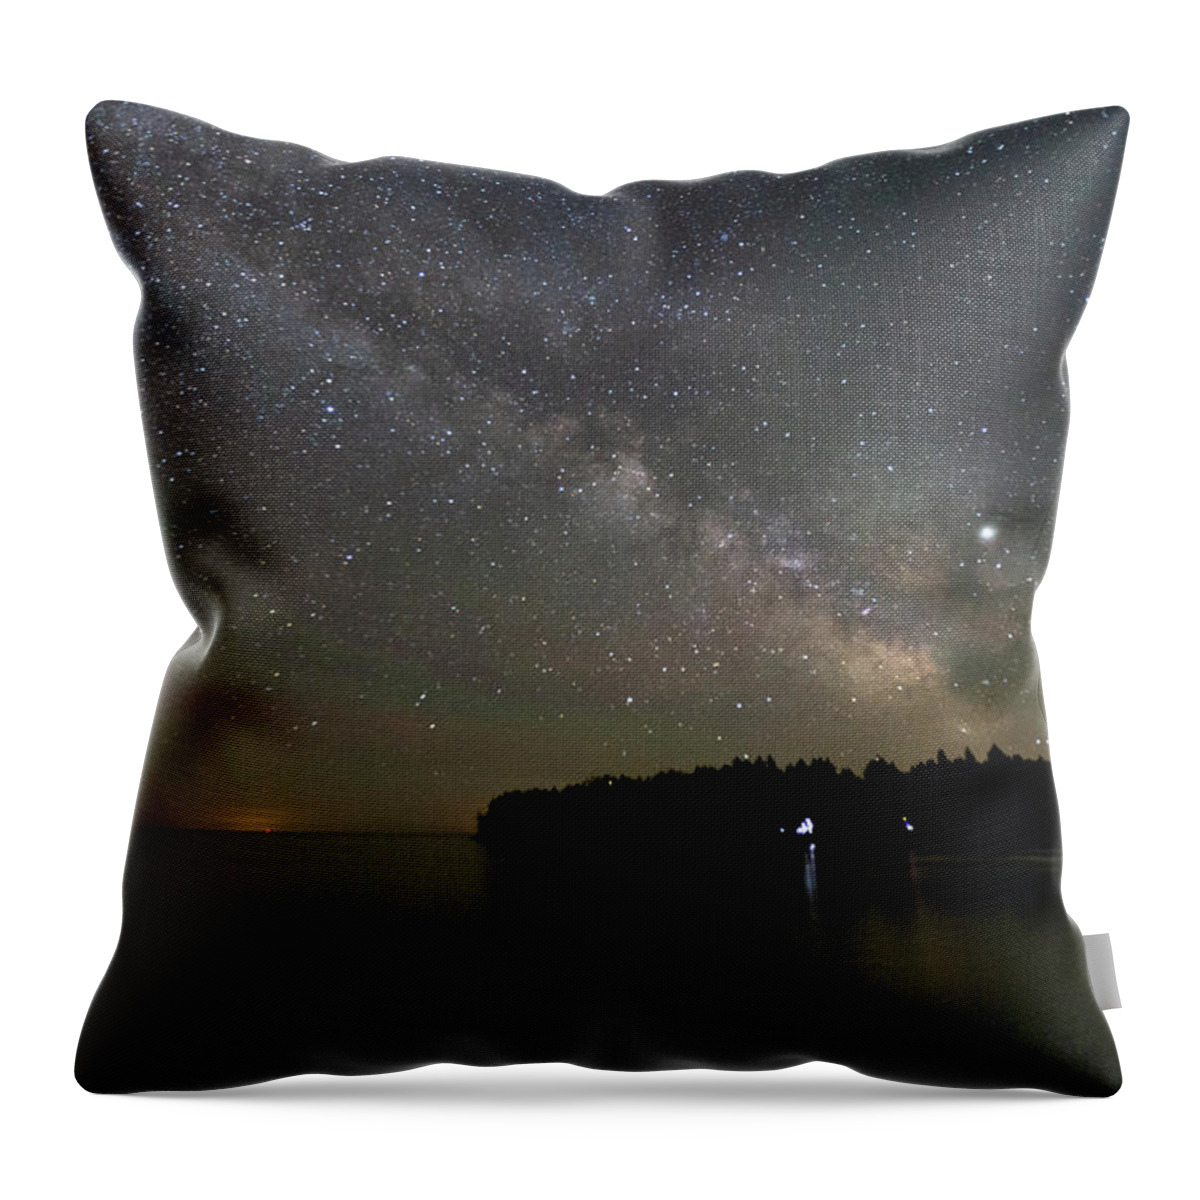 Door County Throw Pillow featuring the photograph Milky Way Over Cana Island by Paul Schultz